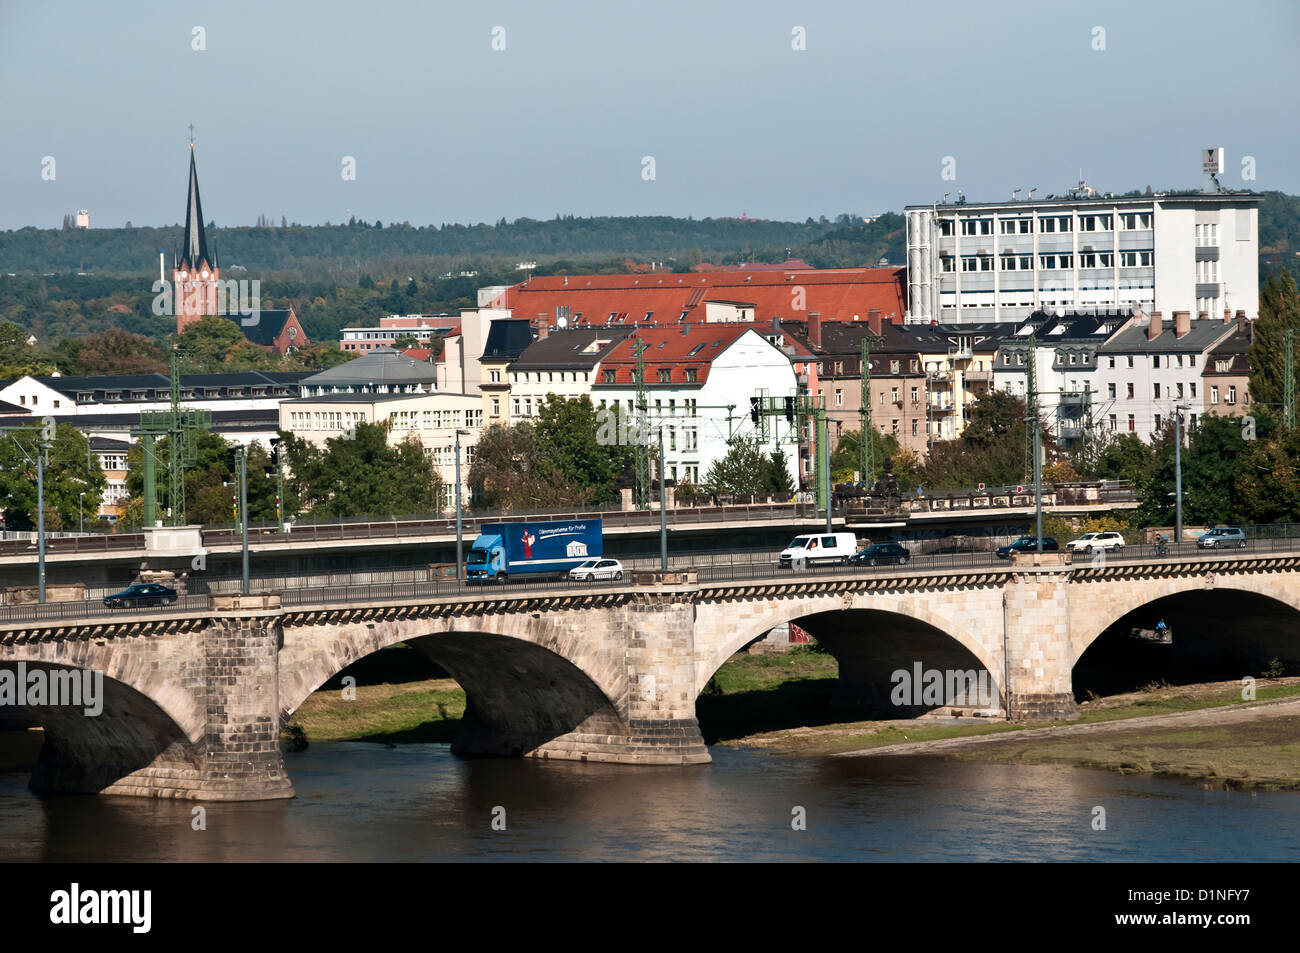 Arched bridge with auto traffic crossing the Elbe River, Dresden, Germany Stock Photo